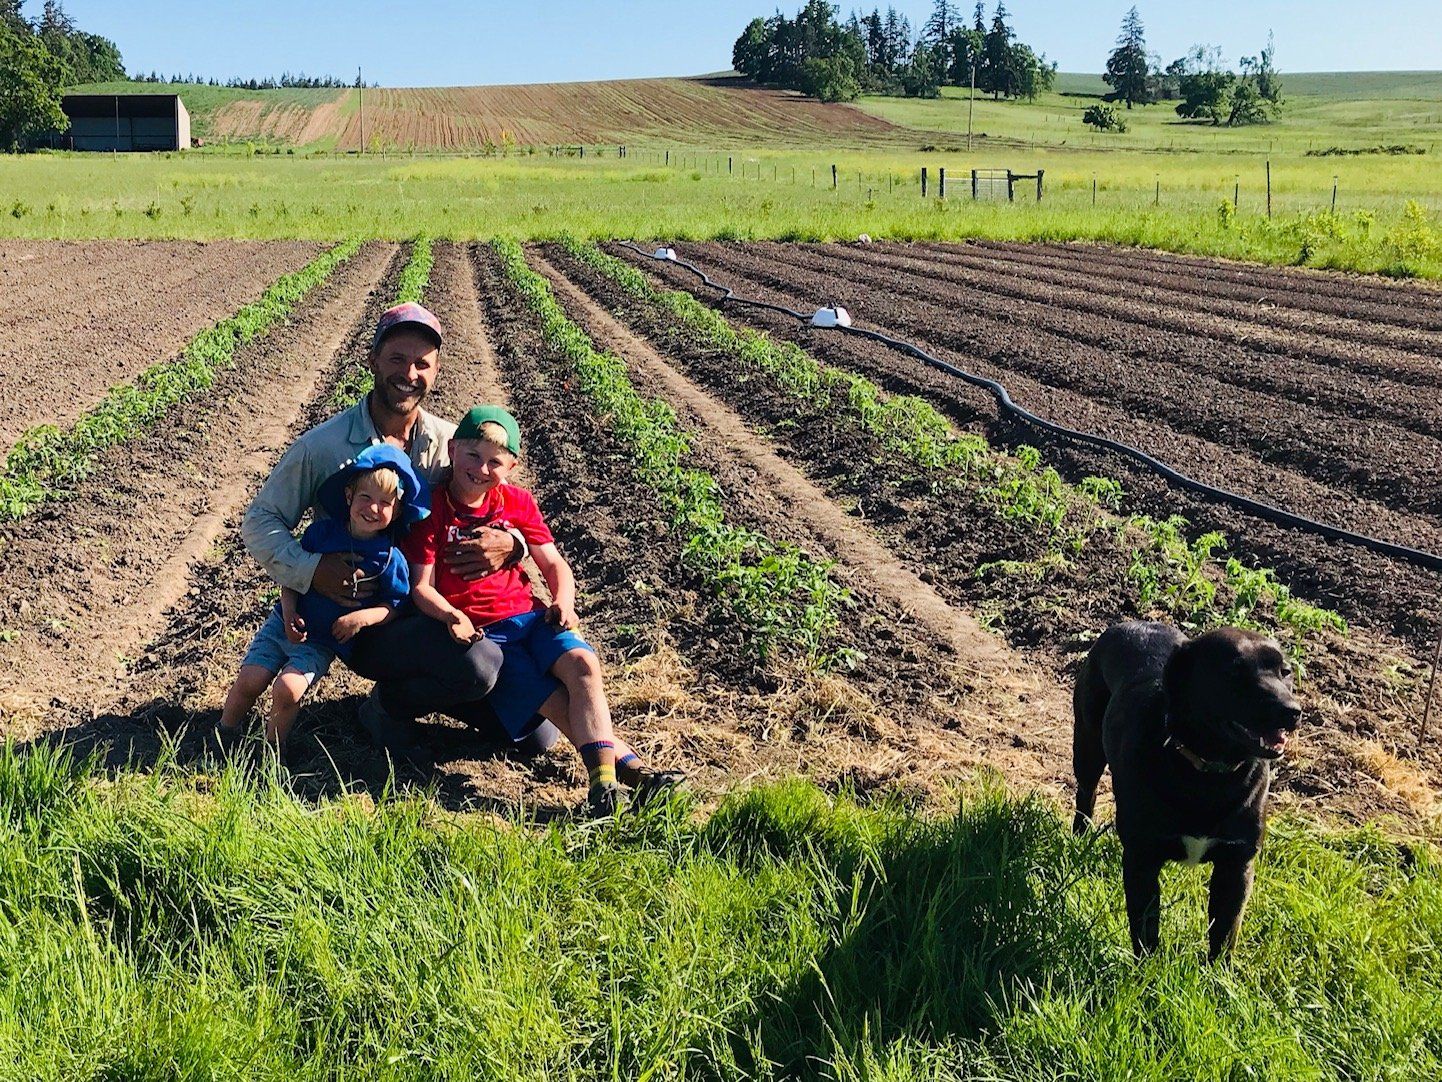 Previous Happening: Farm Happenings for May 18, 2021